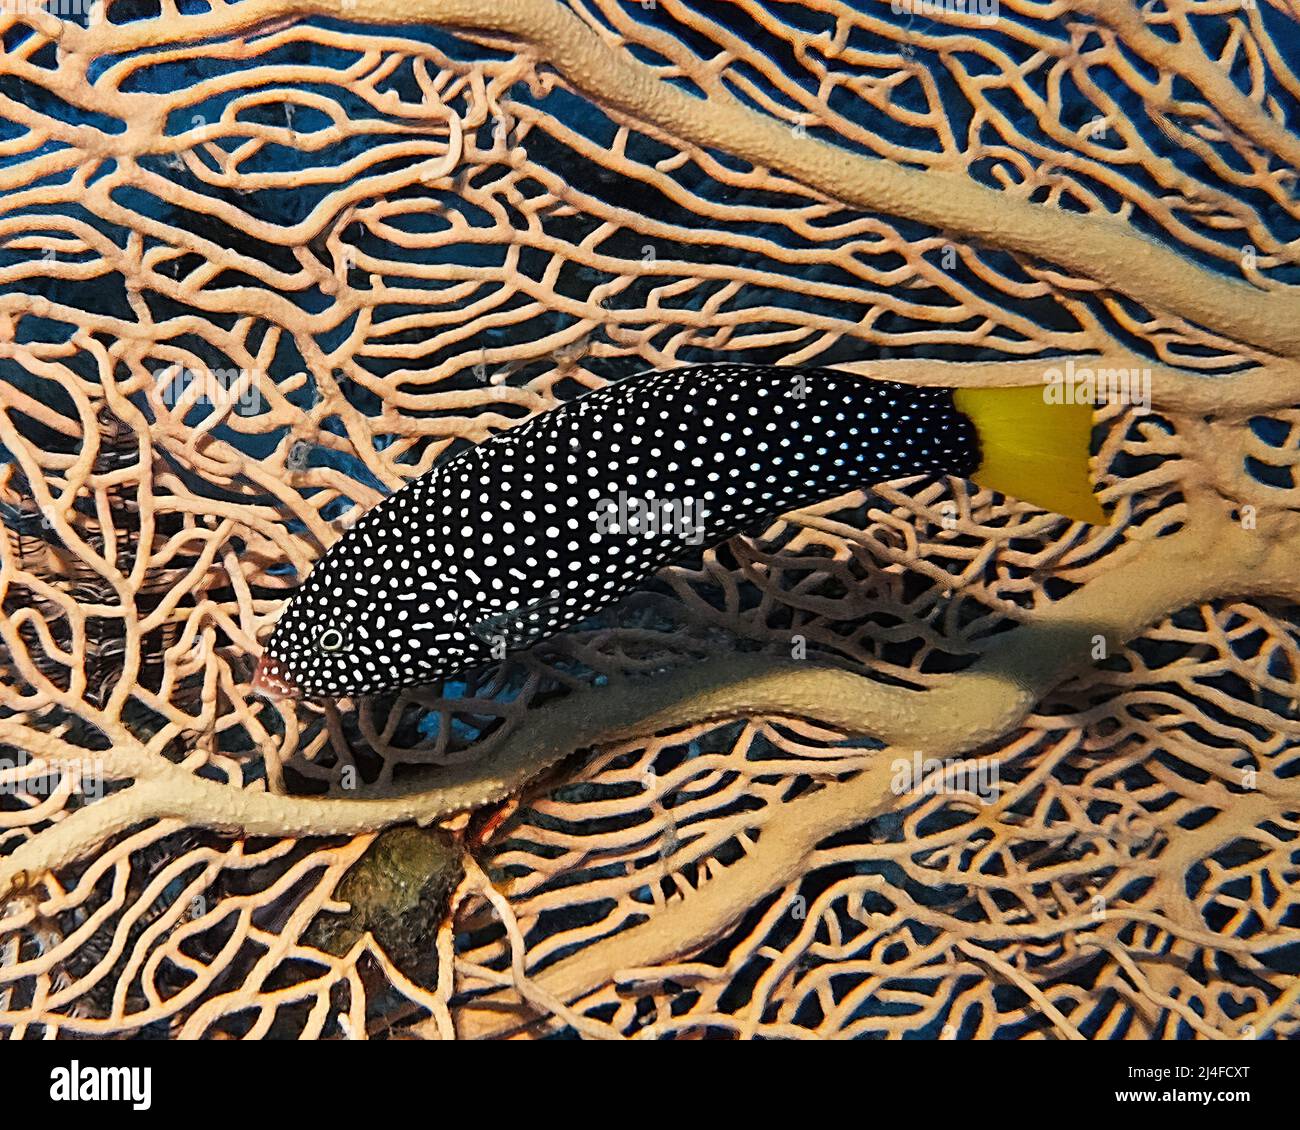 A Yellowtail Wrasse (Anampses meleagrides) in the Red Sea, Egypt Stock Photo